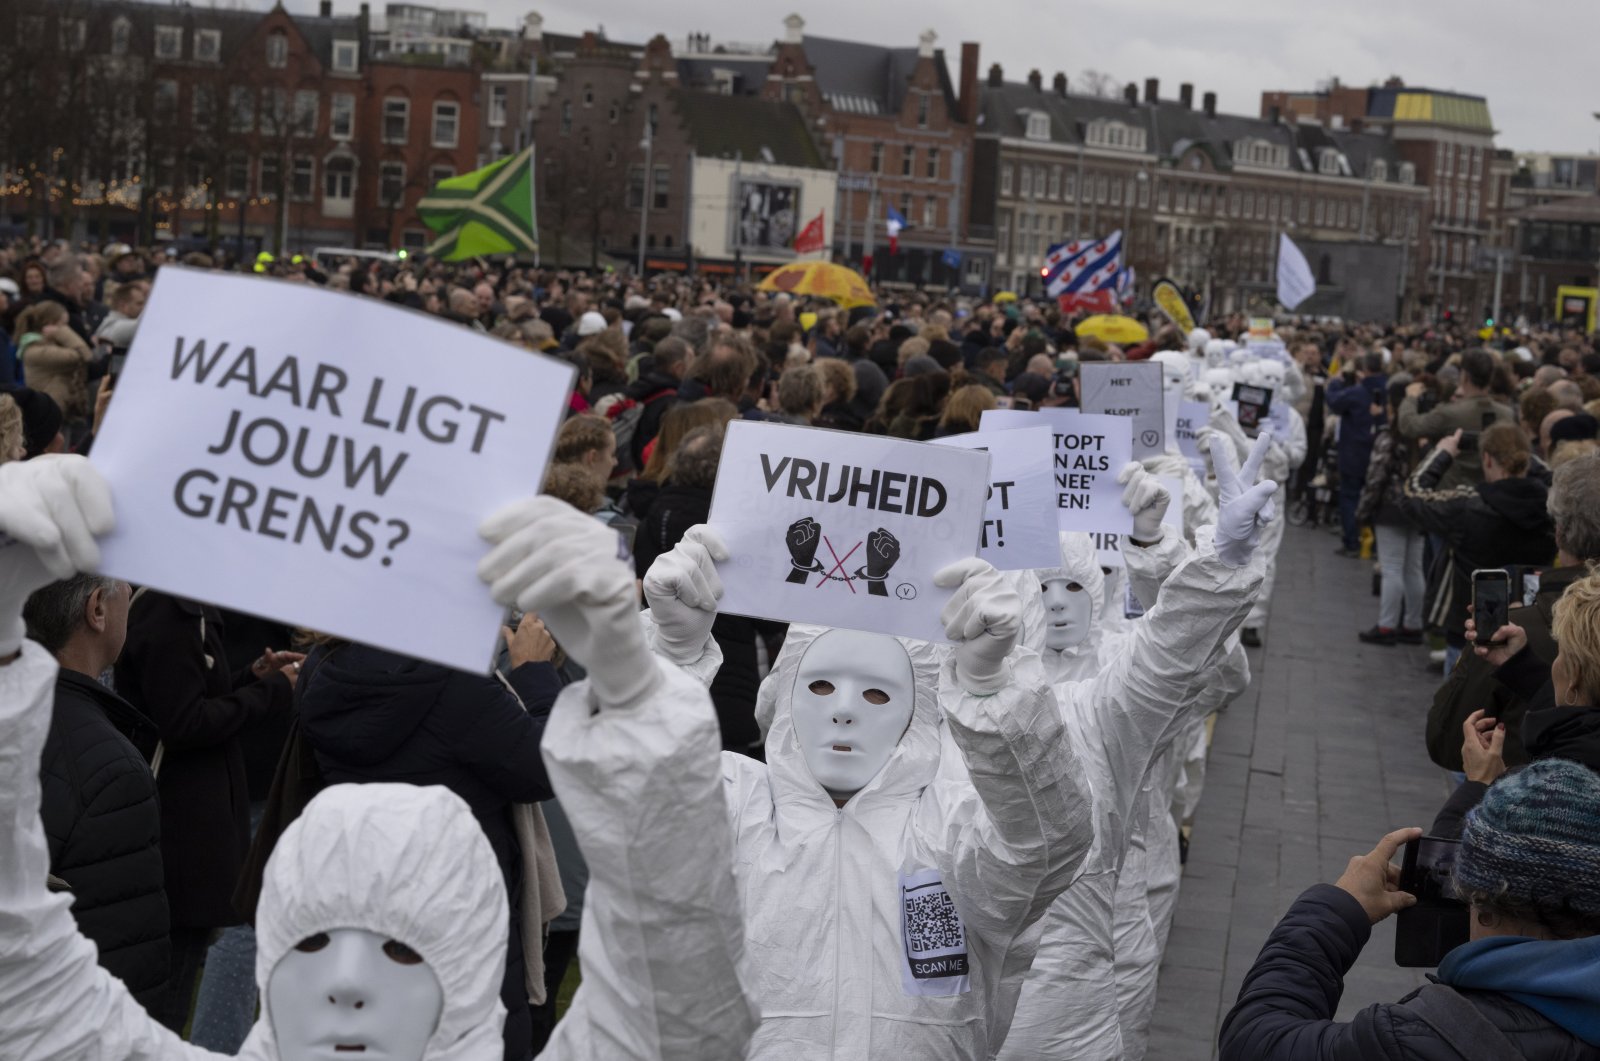 A sign reads &quot;Vrijheid&quot; or &quot;Freedom&quot; as thousands of people defied a ban to gather and protest the Dutch government&#039;s coronavirus lockdown measures, in Amsterdam, Netherlands, Jan. 2, 2022. (AP Photo)